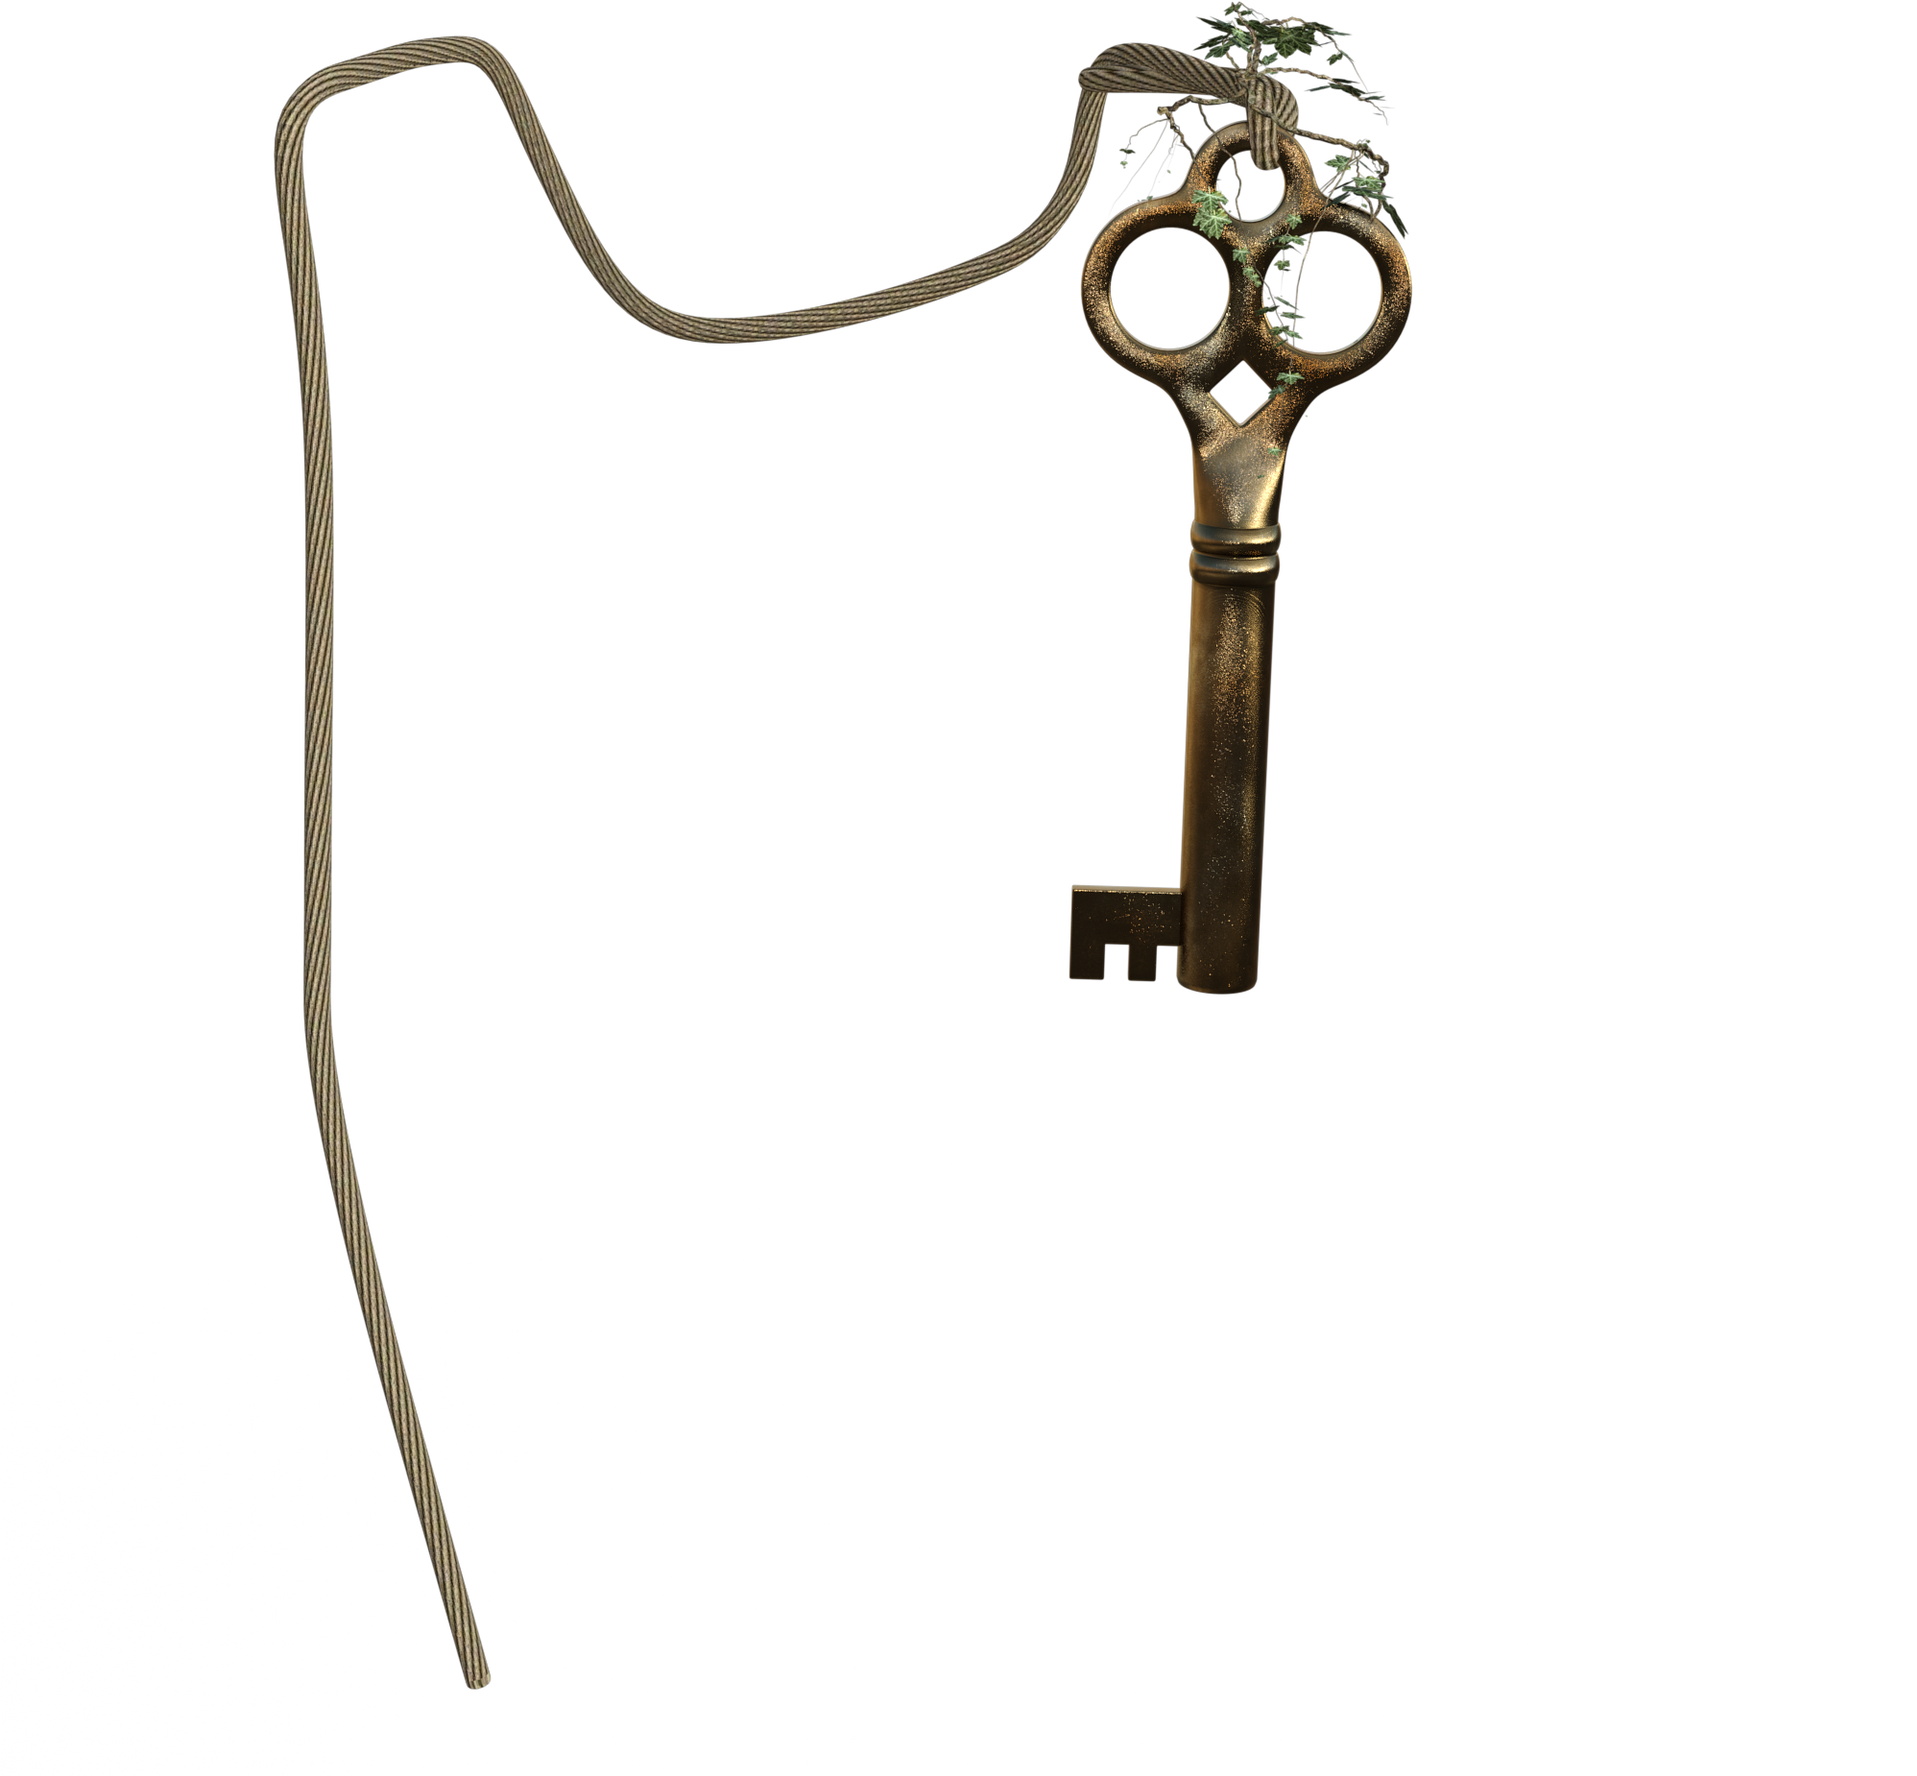 A Key From A Rope